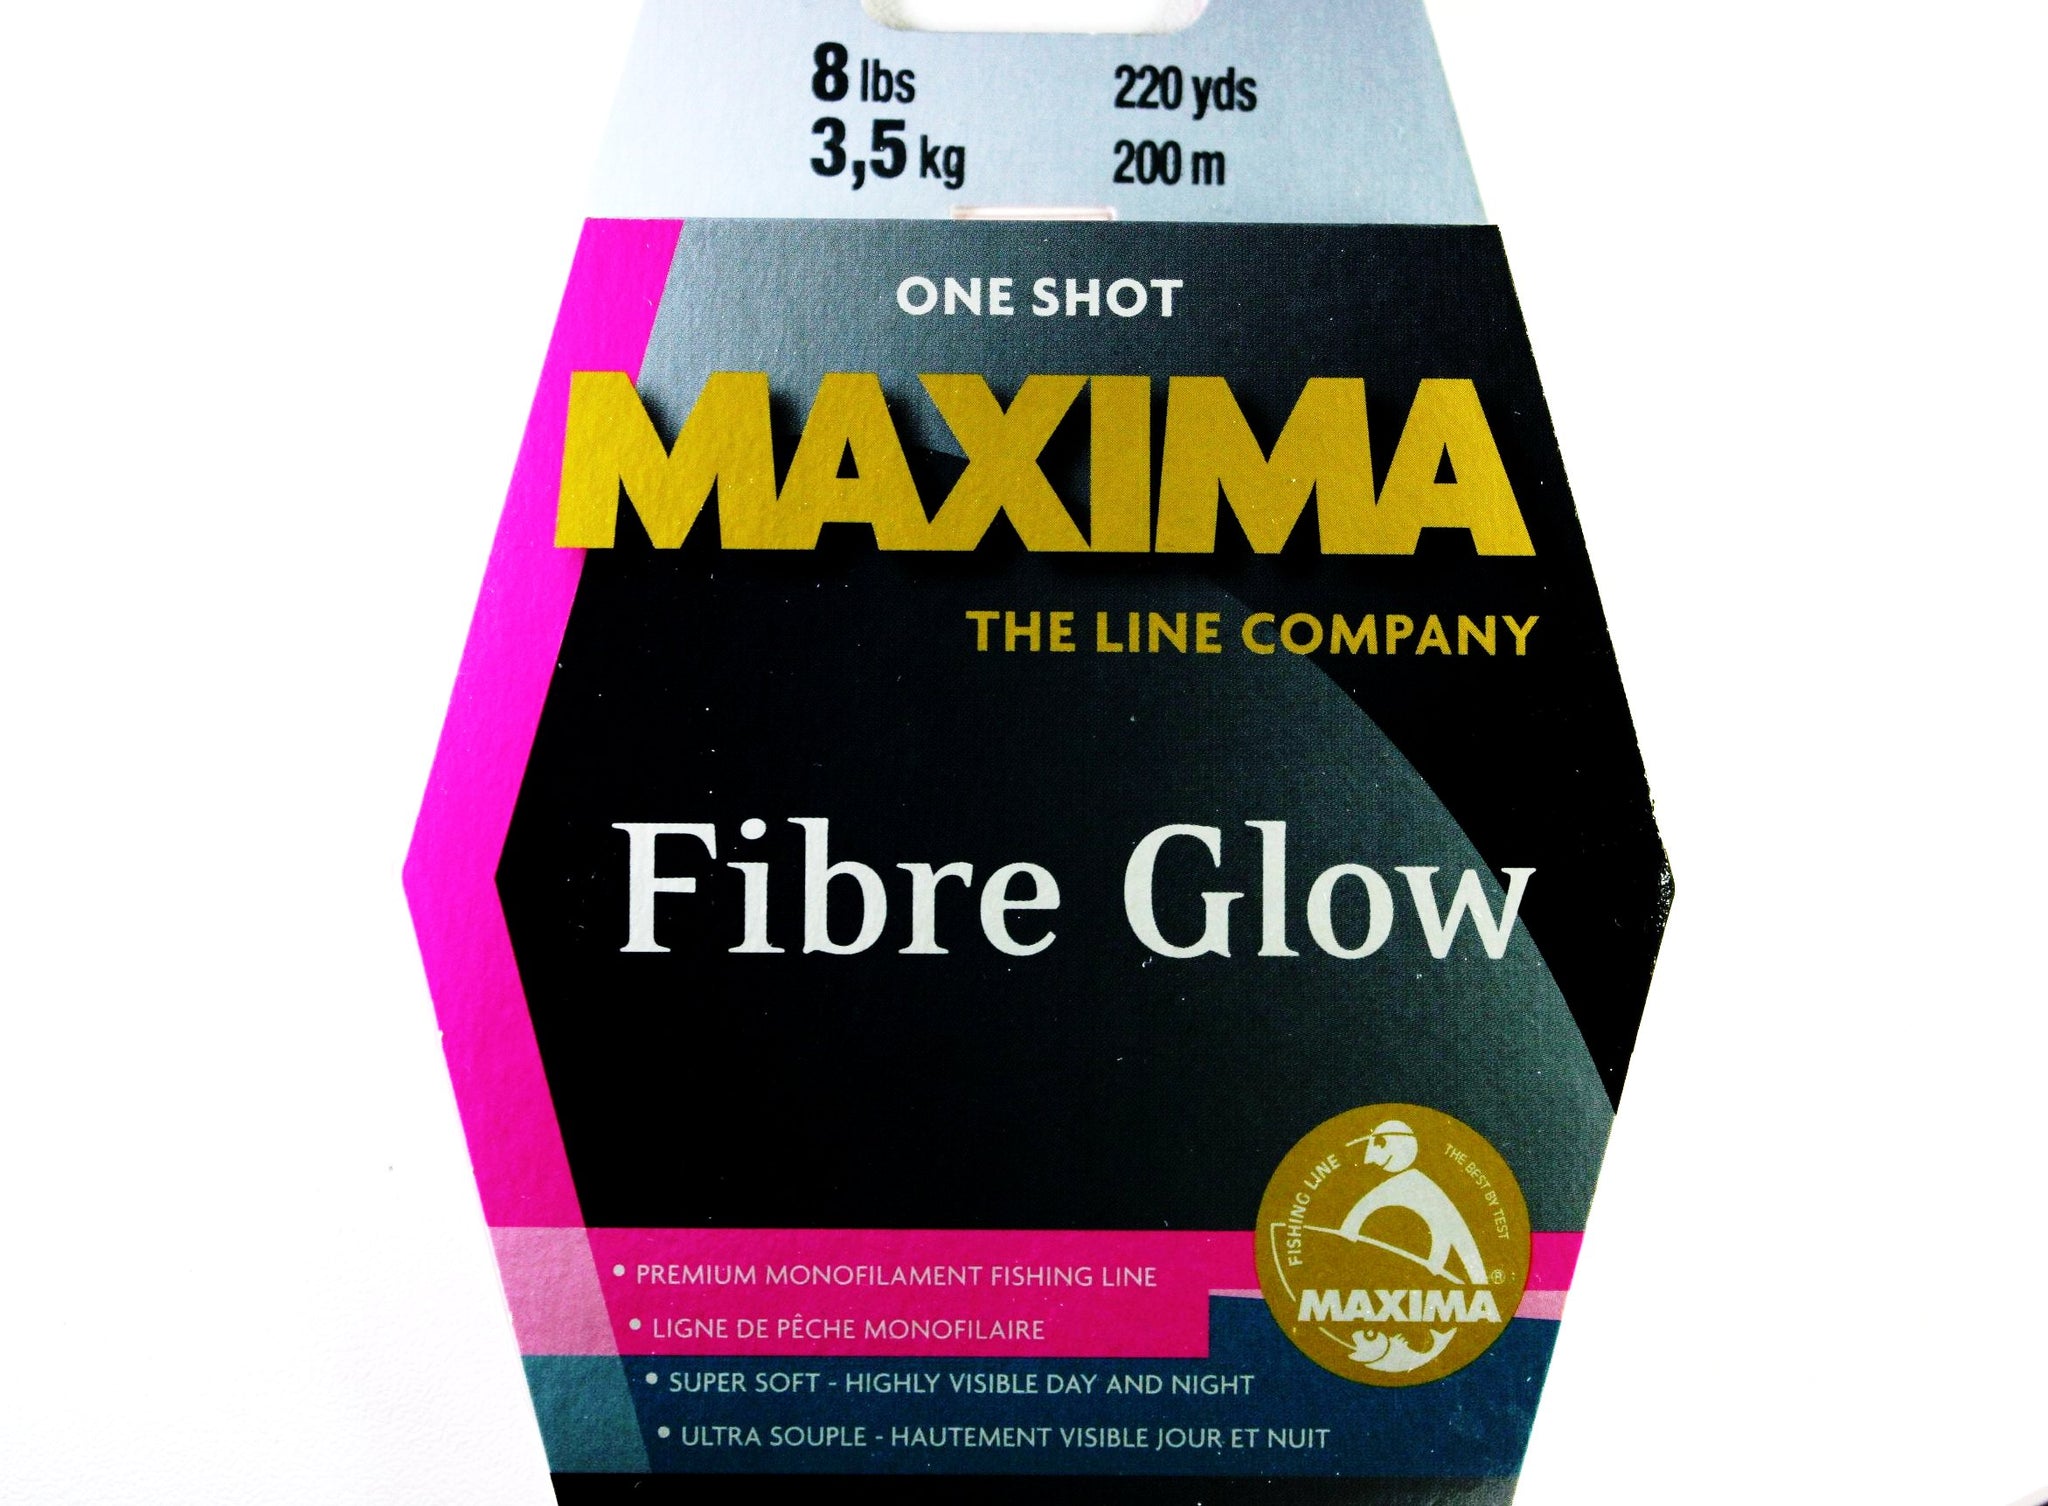 Maxima Fibre Glow One Shot Fishing Line – Ultimate Fishing and Outdoors